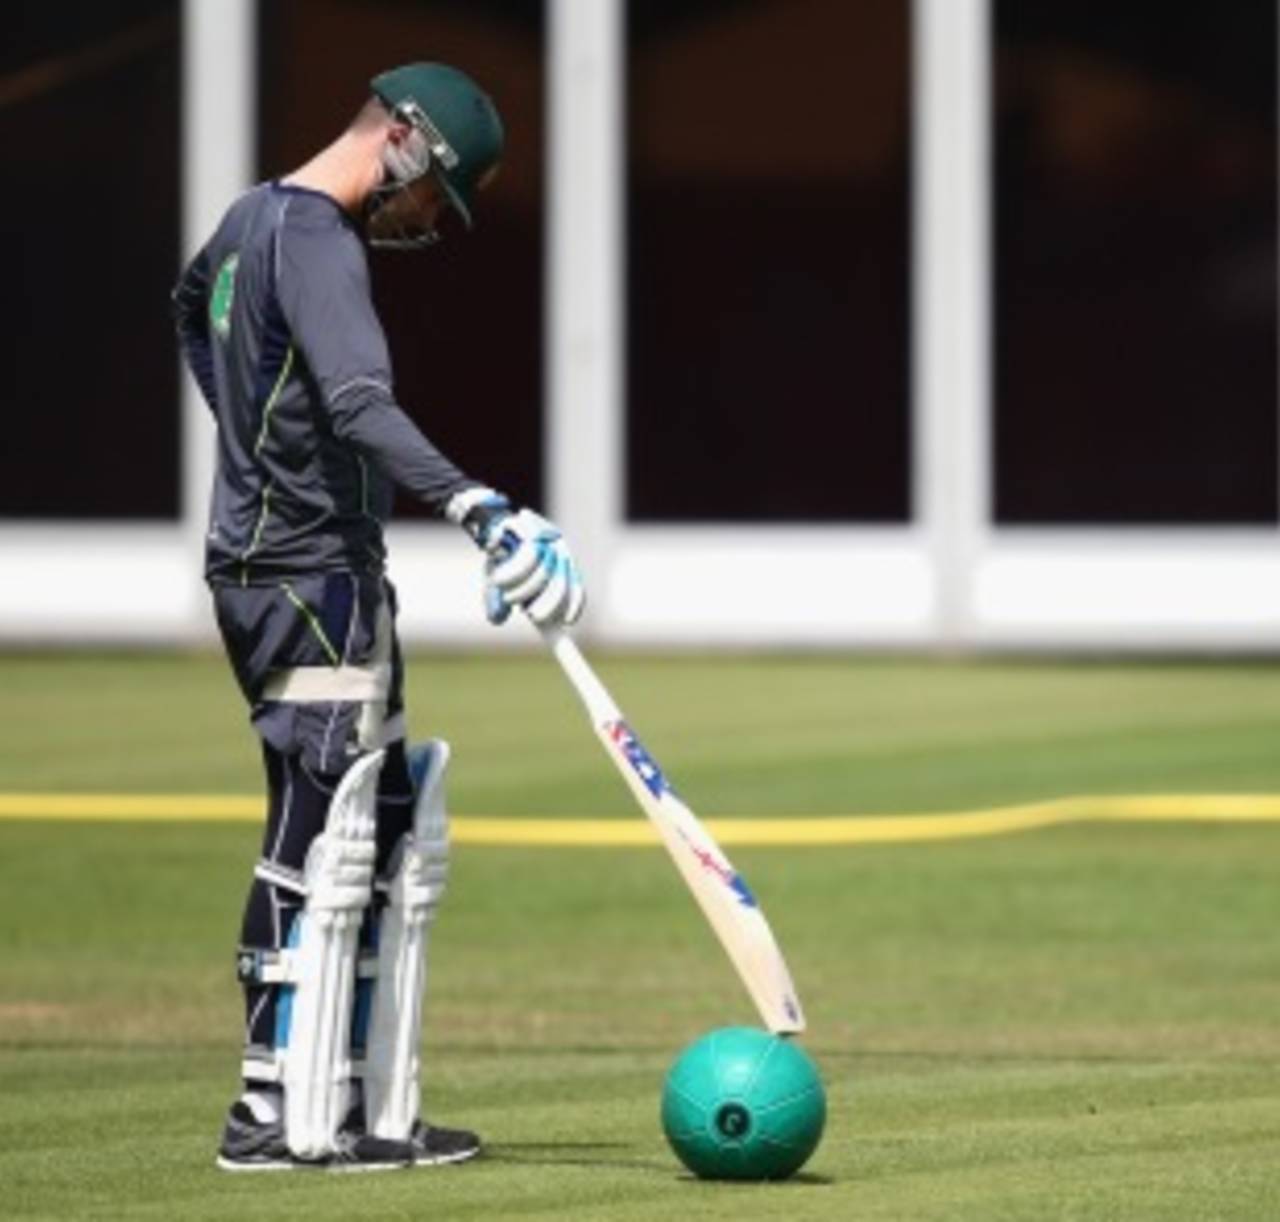 Michael Clarke during a practice session ahead of the second Ashes Test, Lord's, July 16, 2013